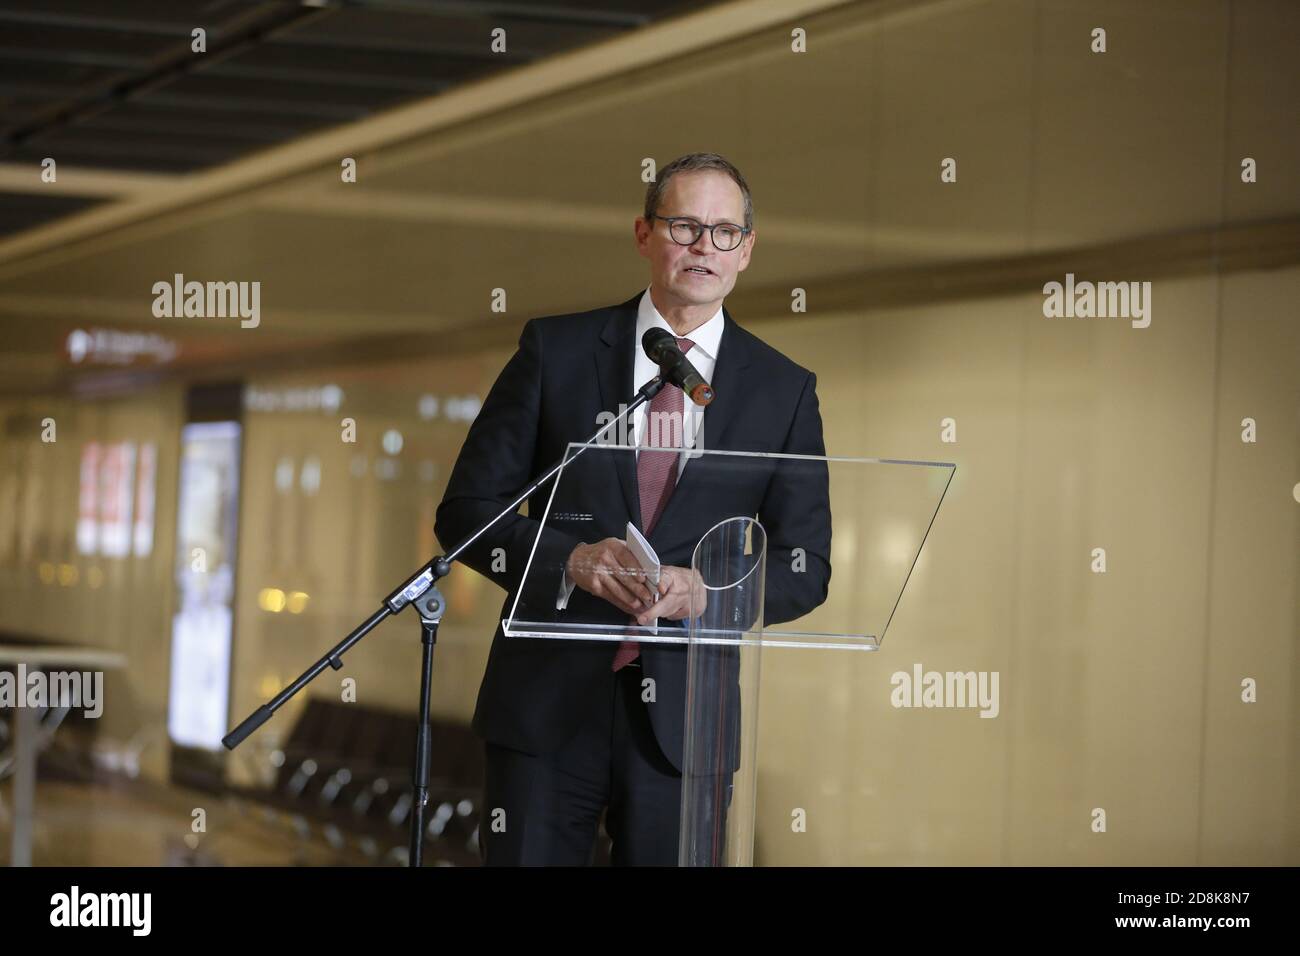 Brandenburg: The photo shows Michael Müller during his speech at the ceremonial unveiling of the Willy Brandt Wall at the new BER airport in Schönefeld. (Photo by Simone Kuhlmey/Pacific Press) Credit: Pacific Press Media Production Corp./Alamy Live News Stock Photo